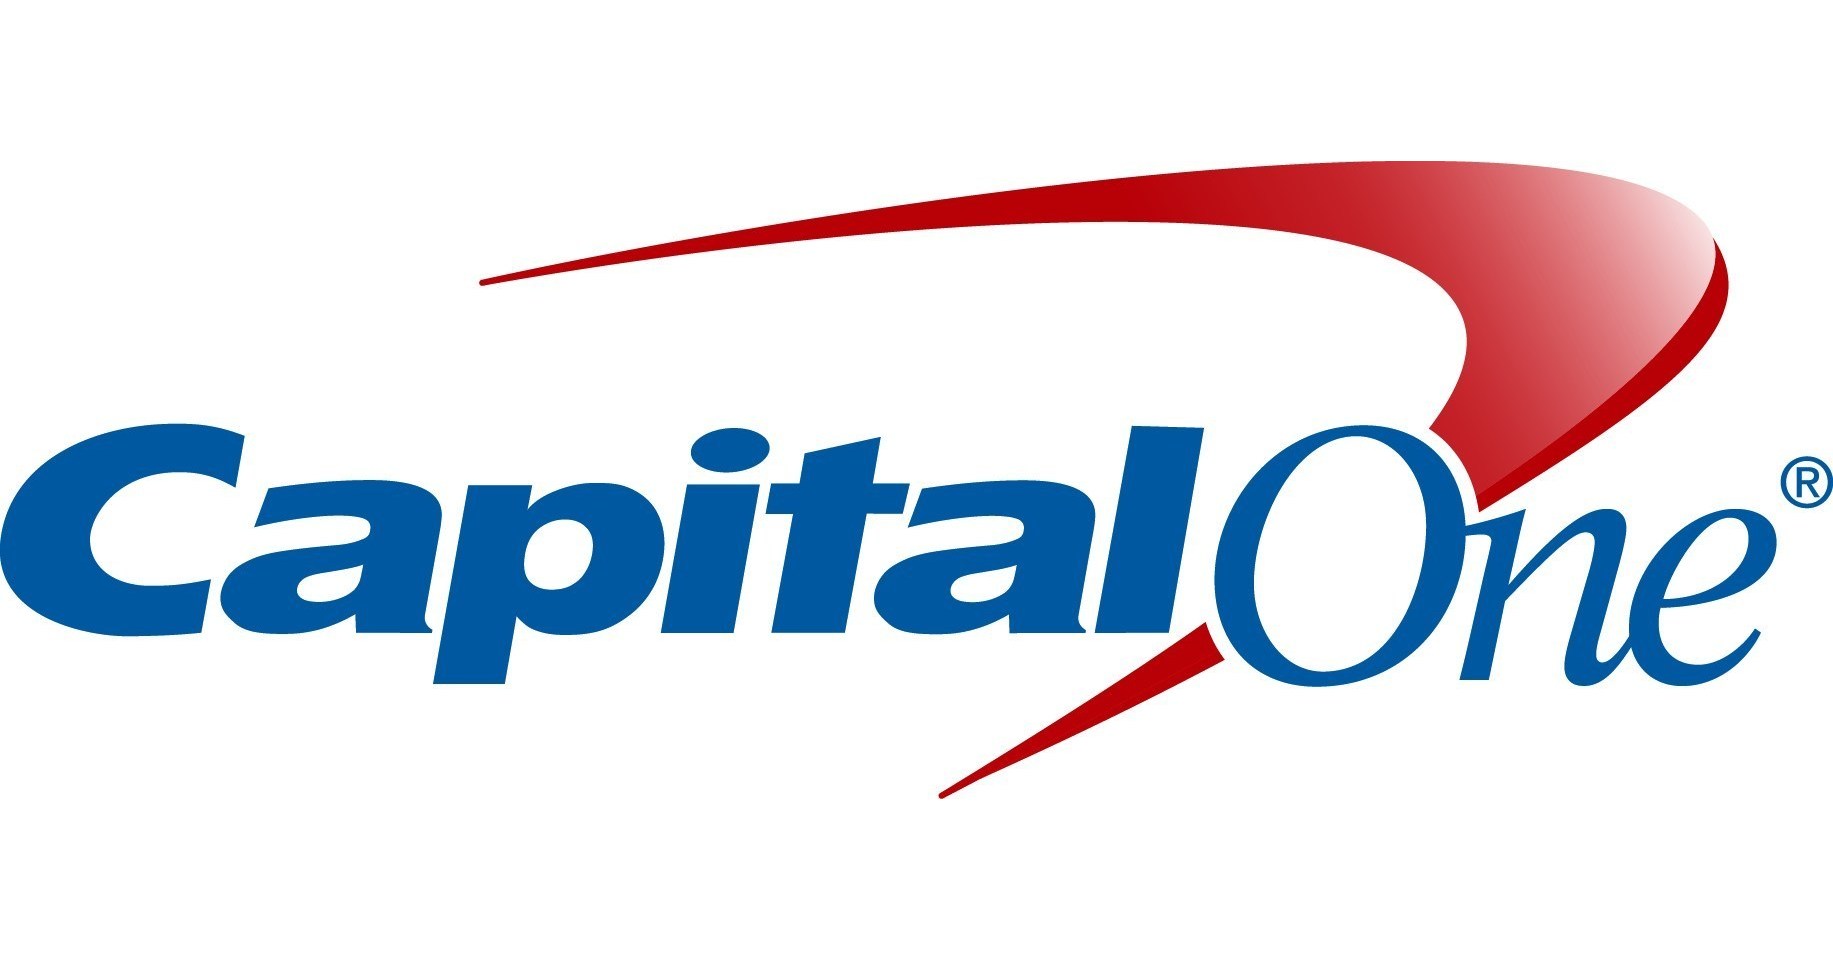 Capital One Reports First Quarter 2019 Net Income of $1.4 billion, or $2.86 per share